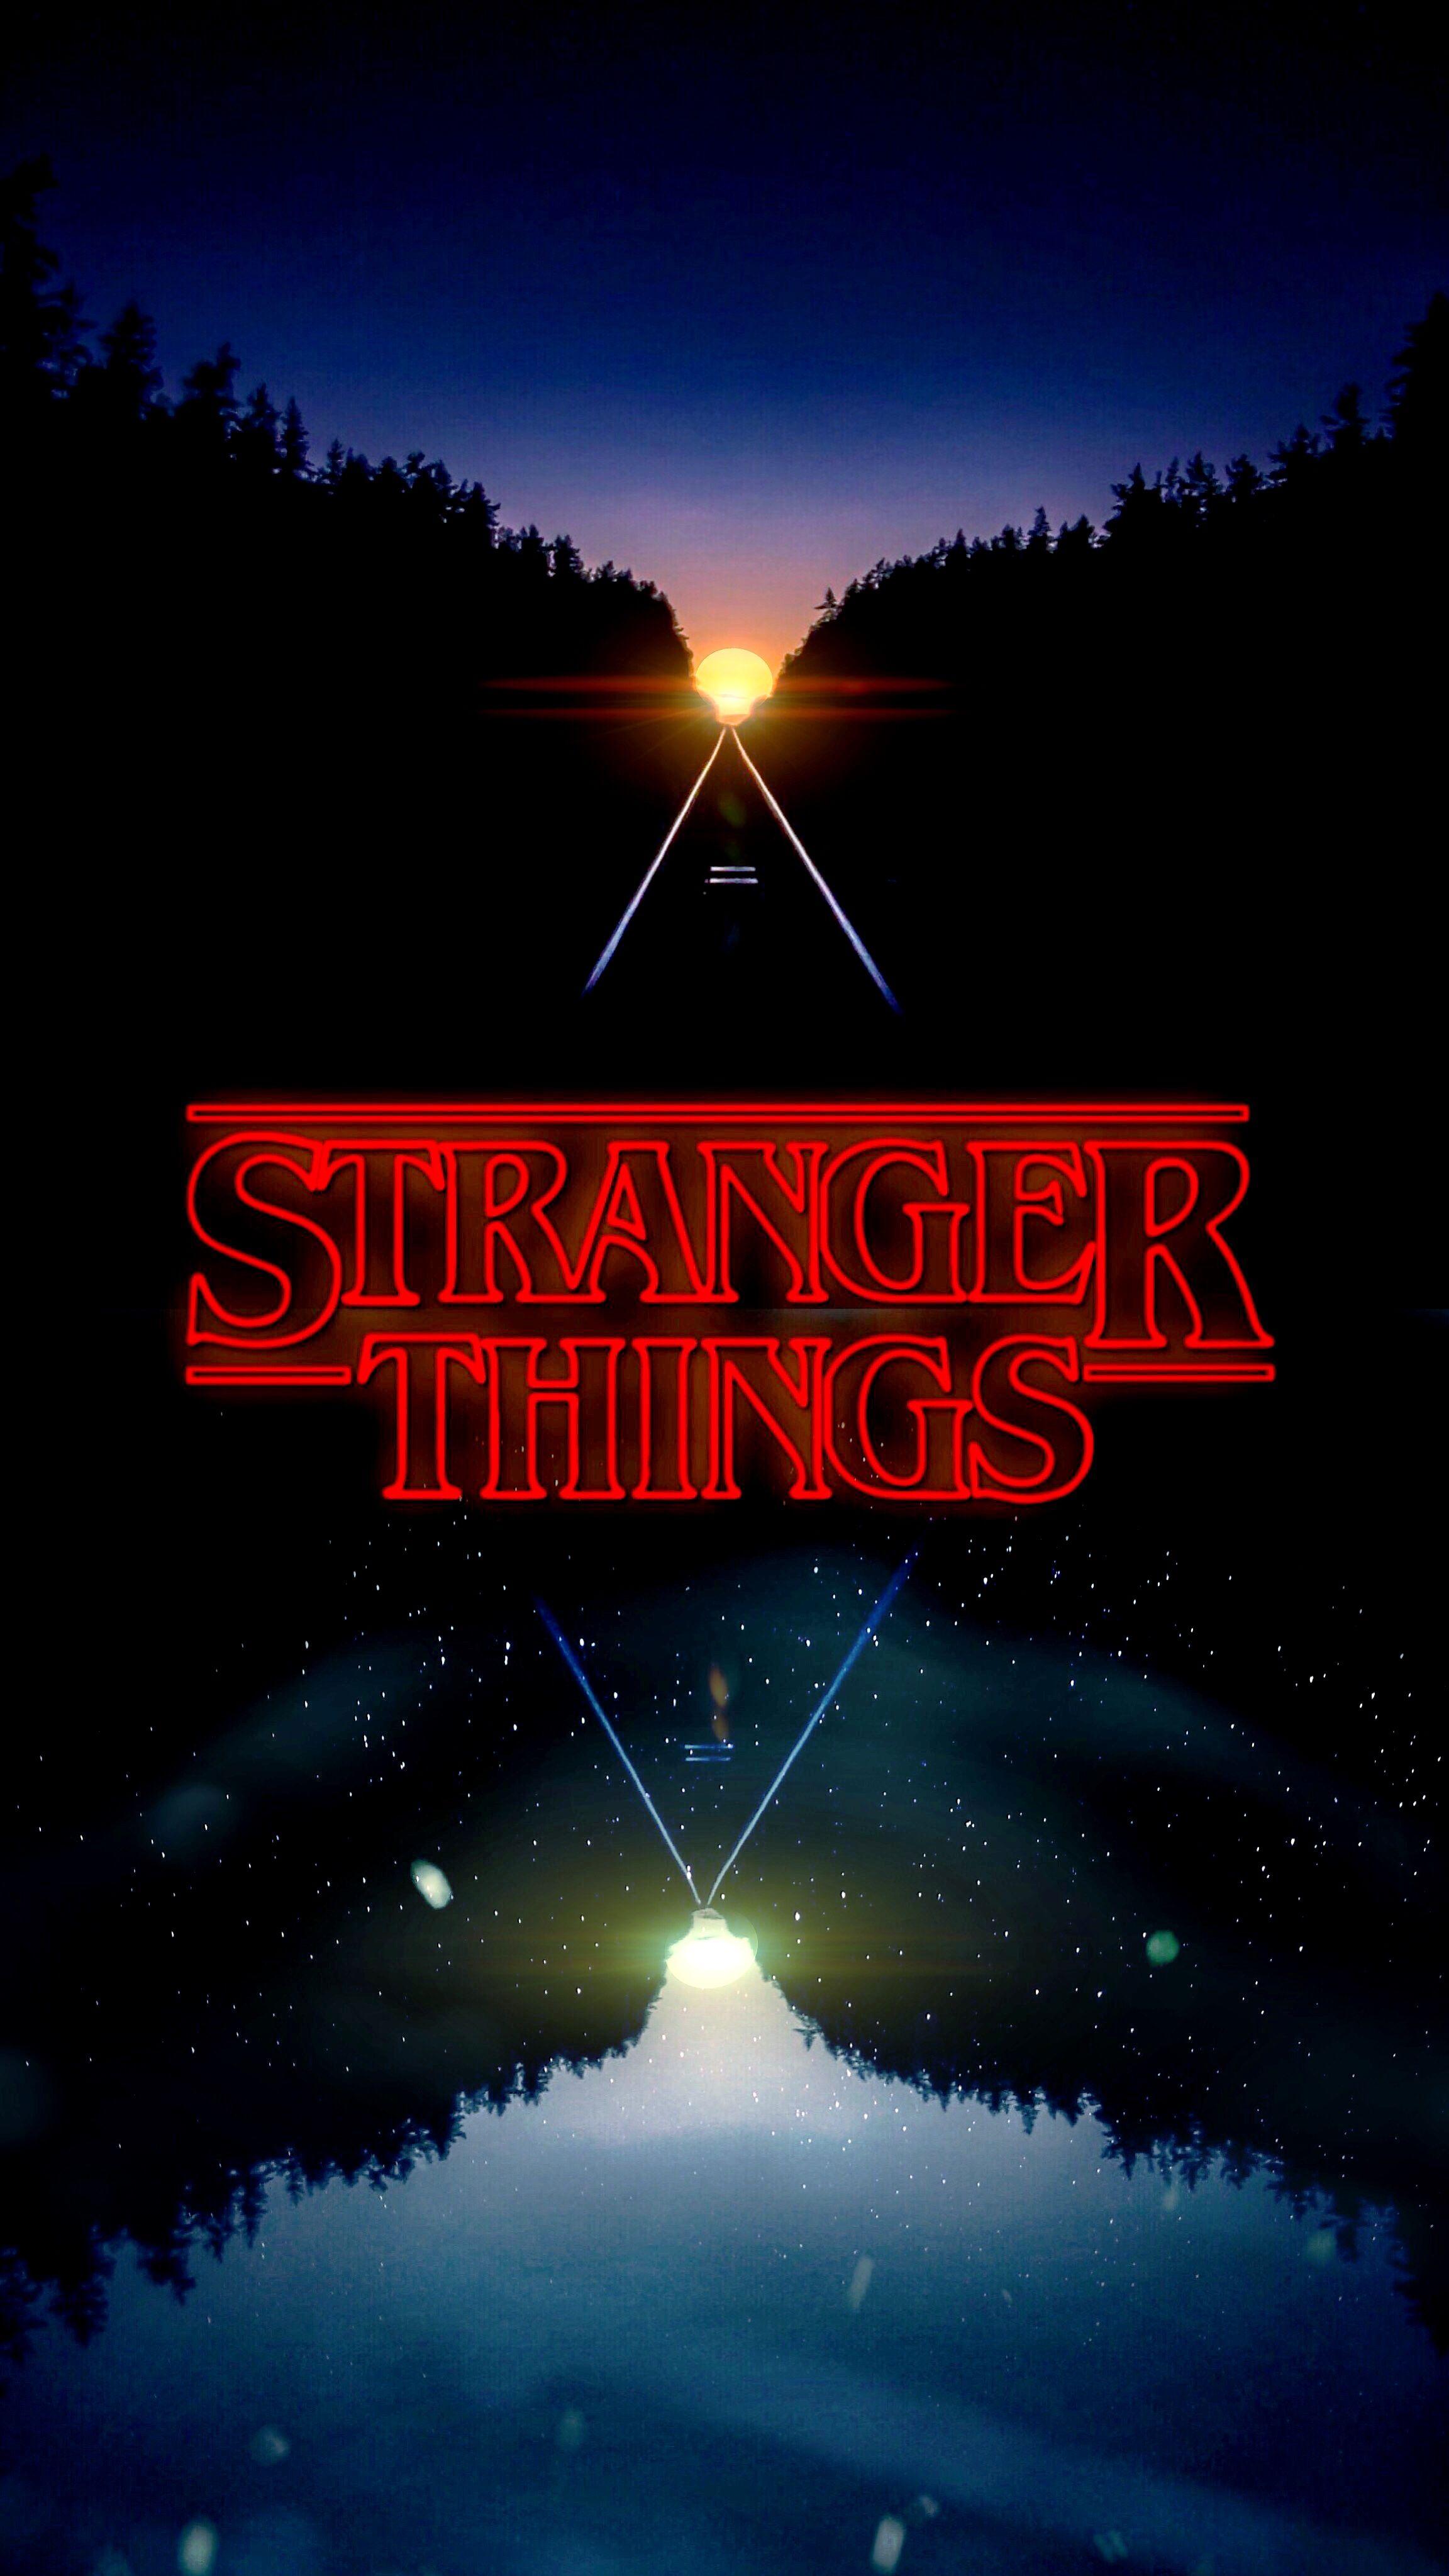 Stranger Things Iphone Wallpapers - Top Free Stranger Things Iphone